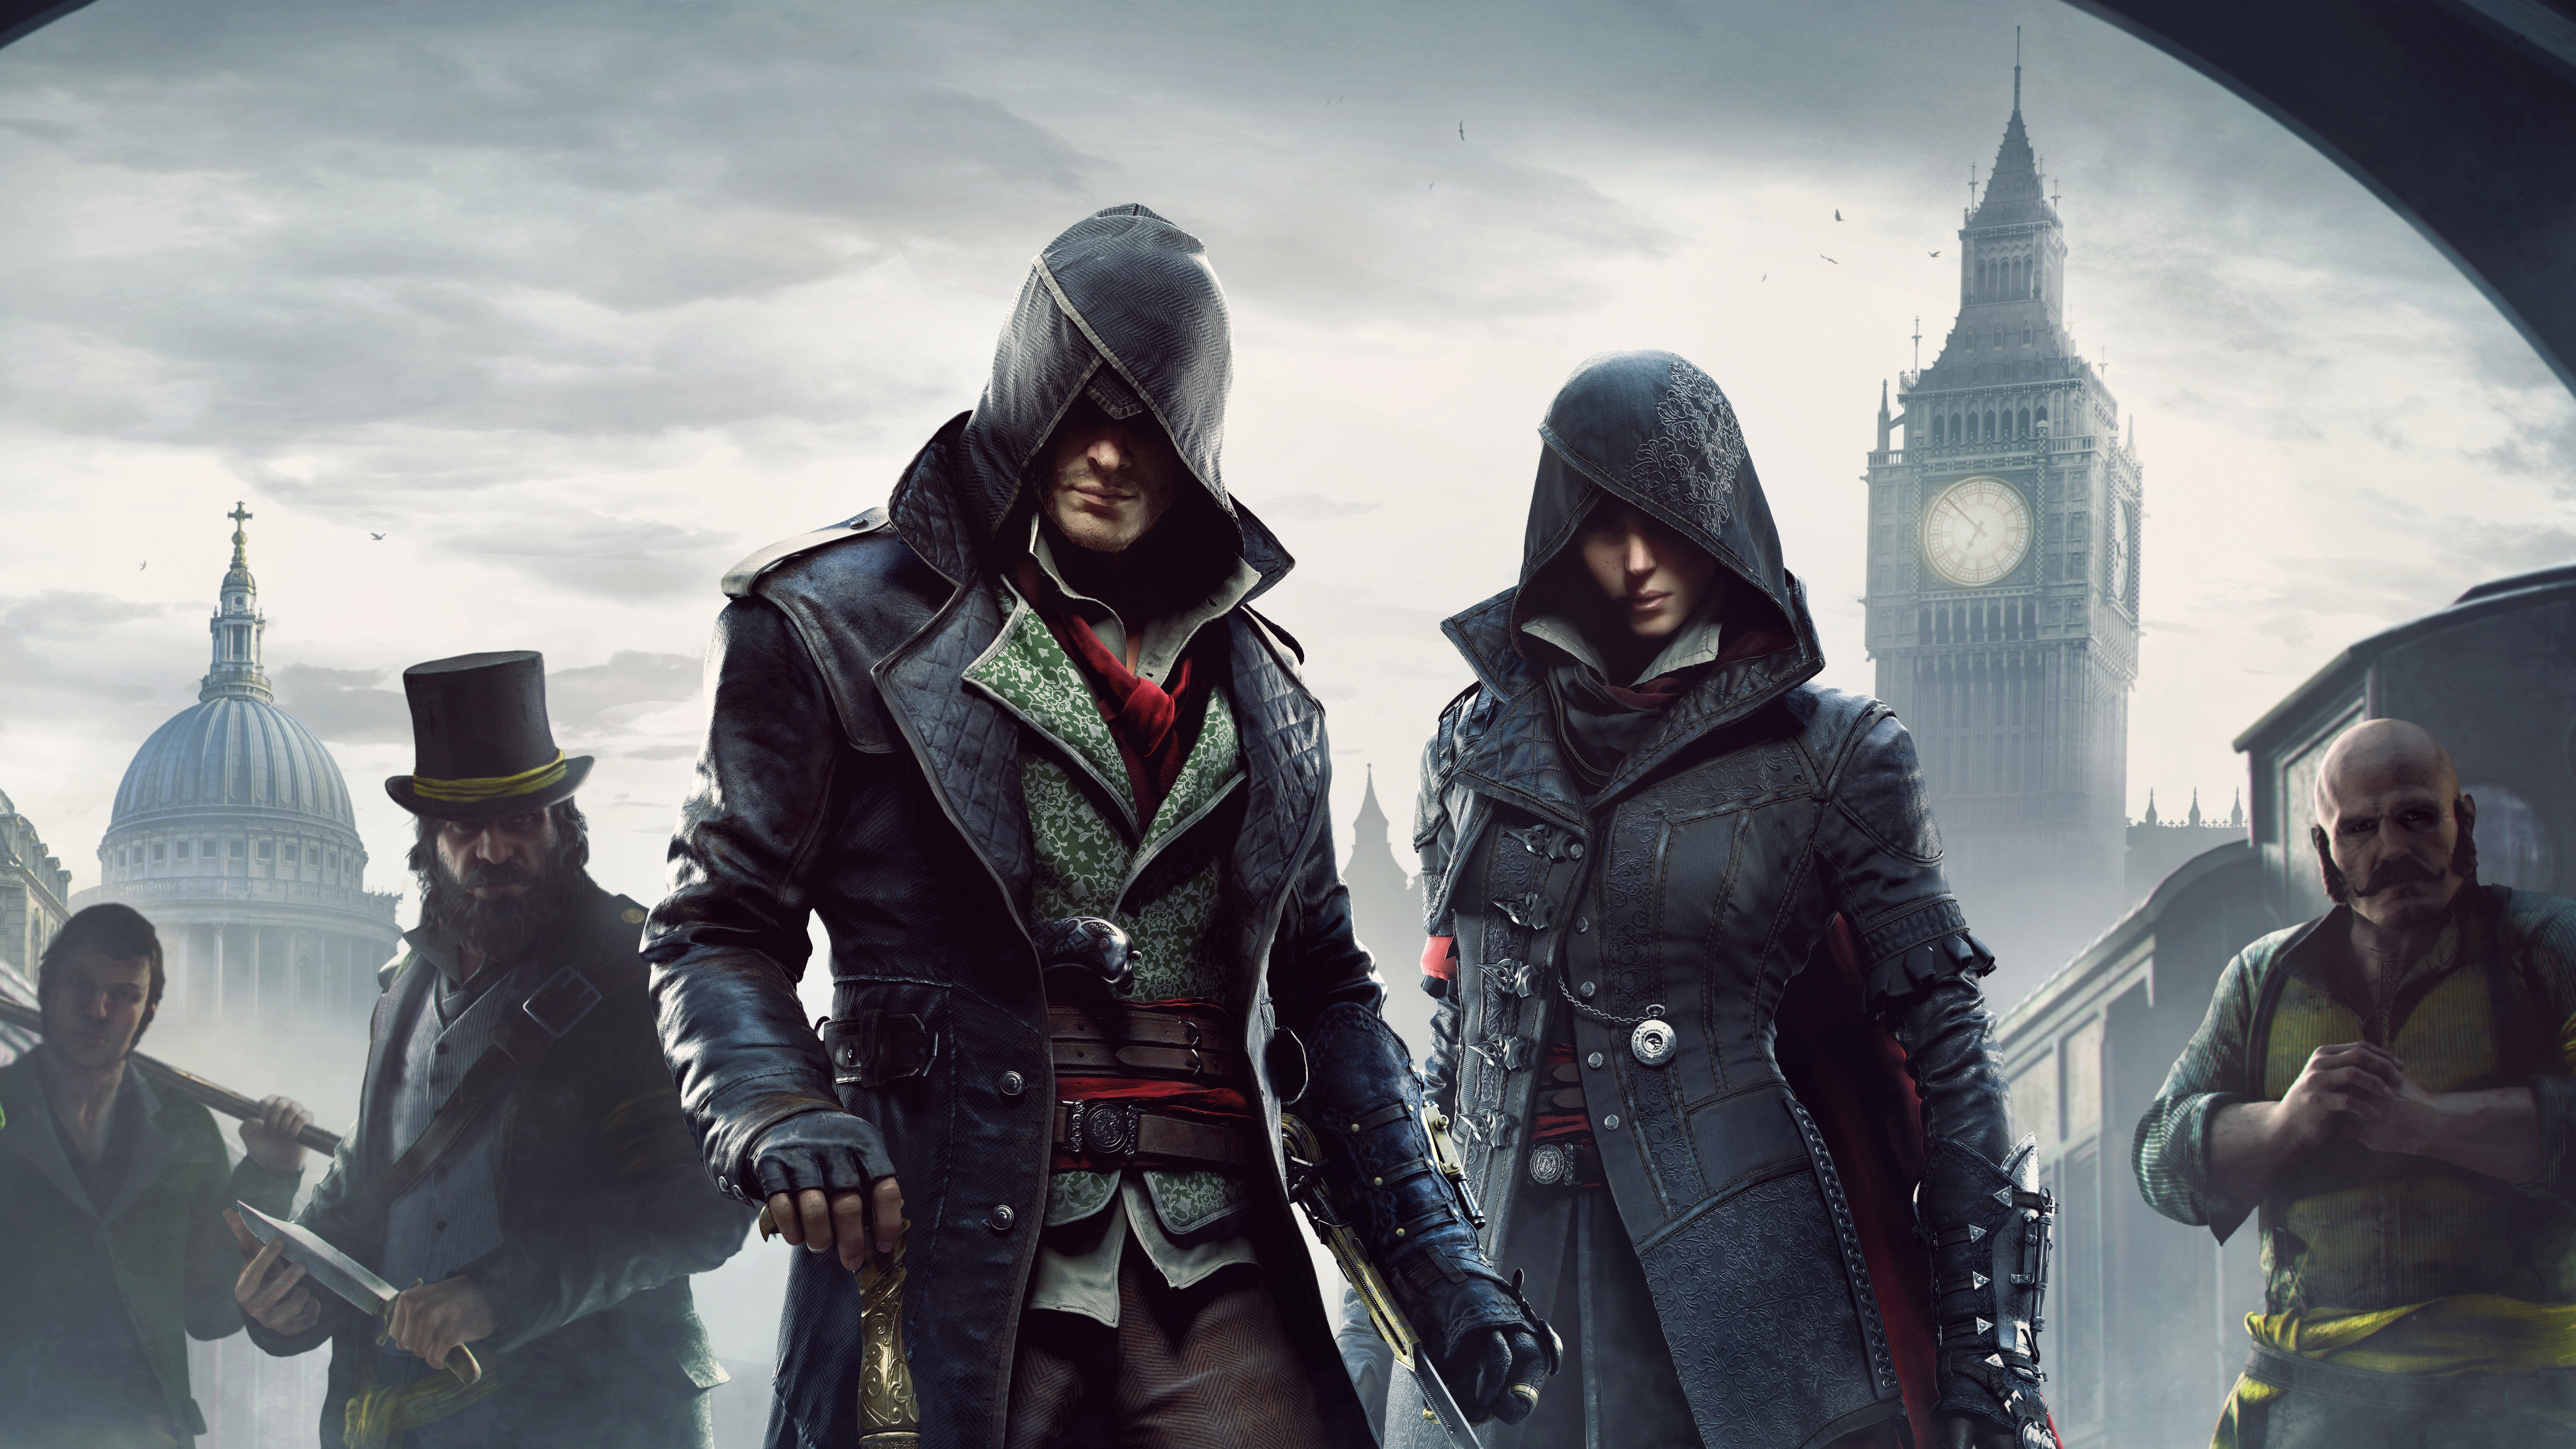 Assassins Creed Syndicate, Ubisoft, Pc-Spiel, Film, Assassins Creed Unity. Wallpaper in 7680x4320 Resolution